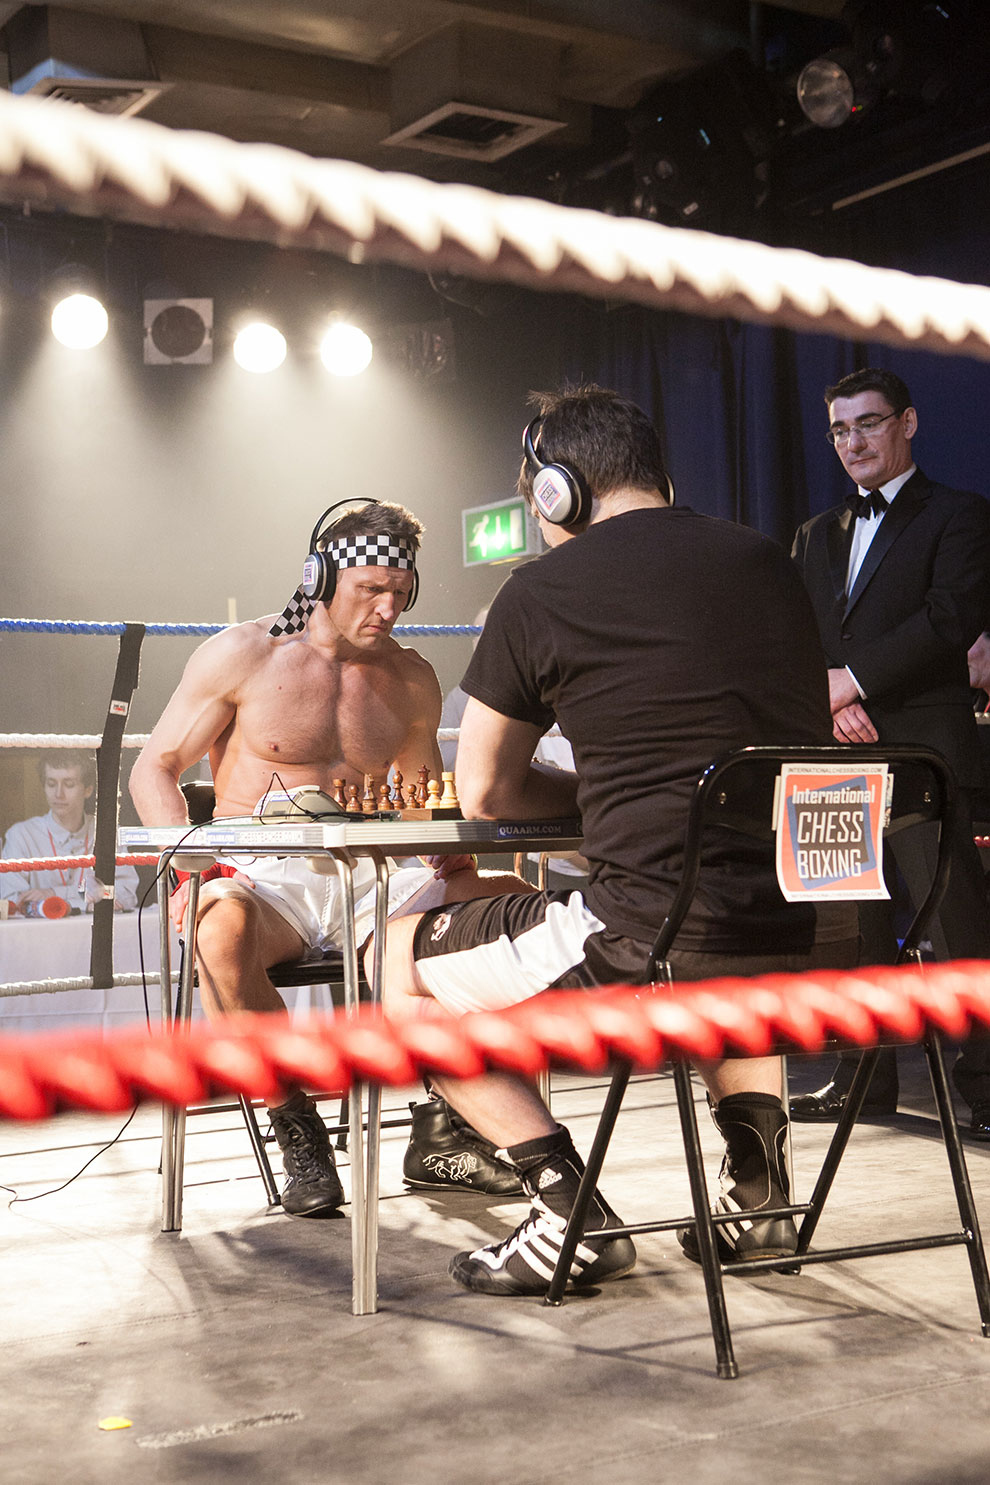 Welcome to the World of Chess Boxing